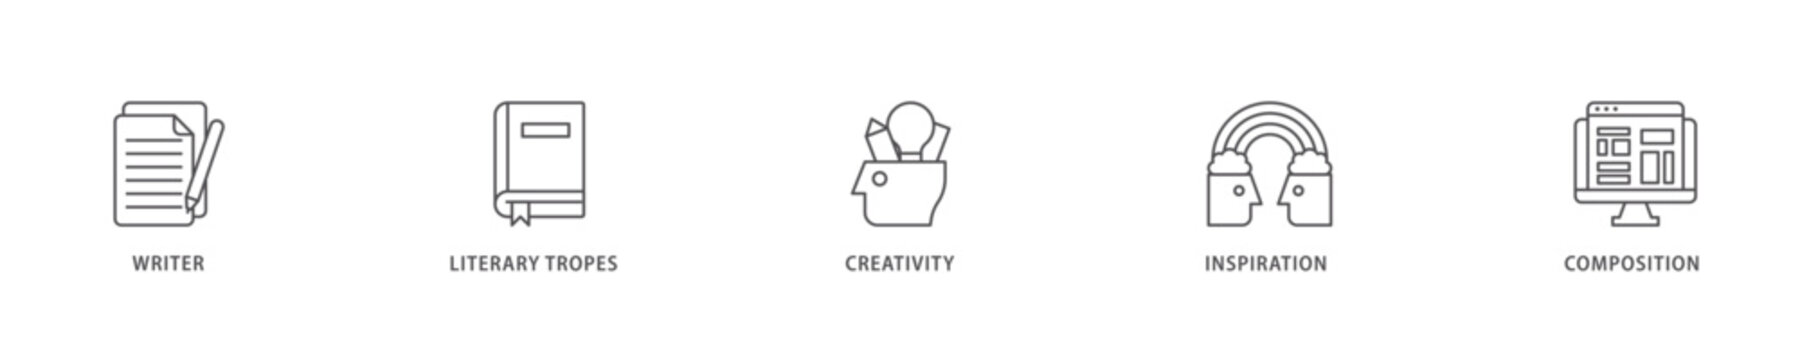 Creative writing icon set flow process which consists of writer, literary tropes, creativity, idea, inspiration, and composition icon live stroke and easy to edit 